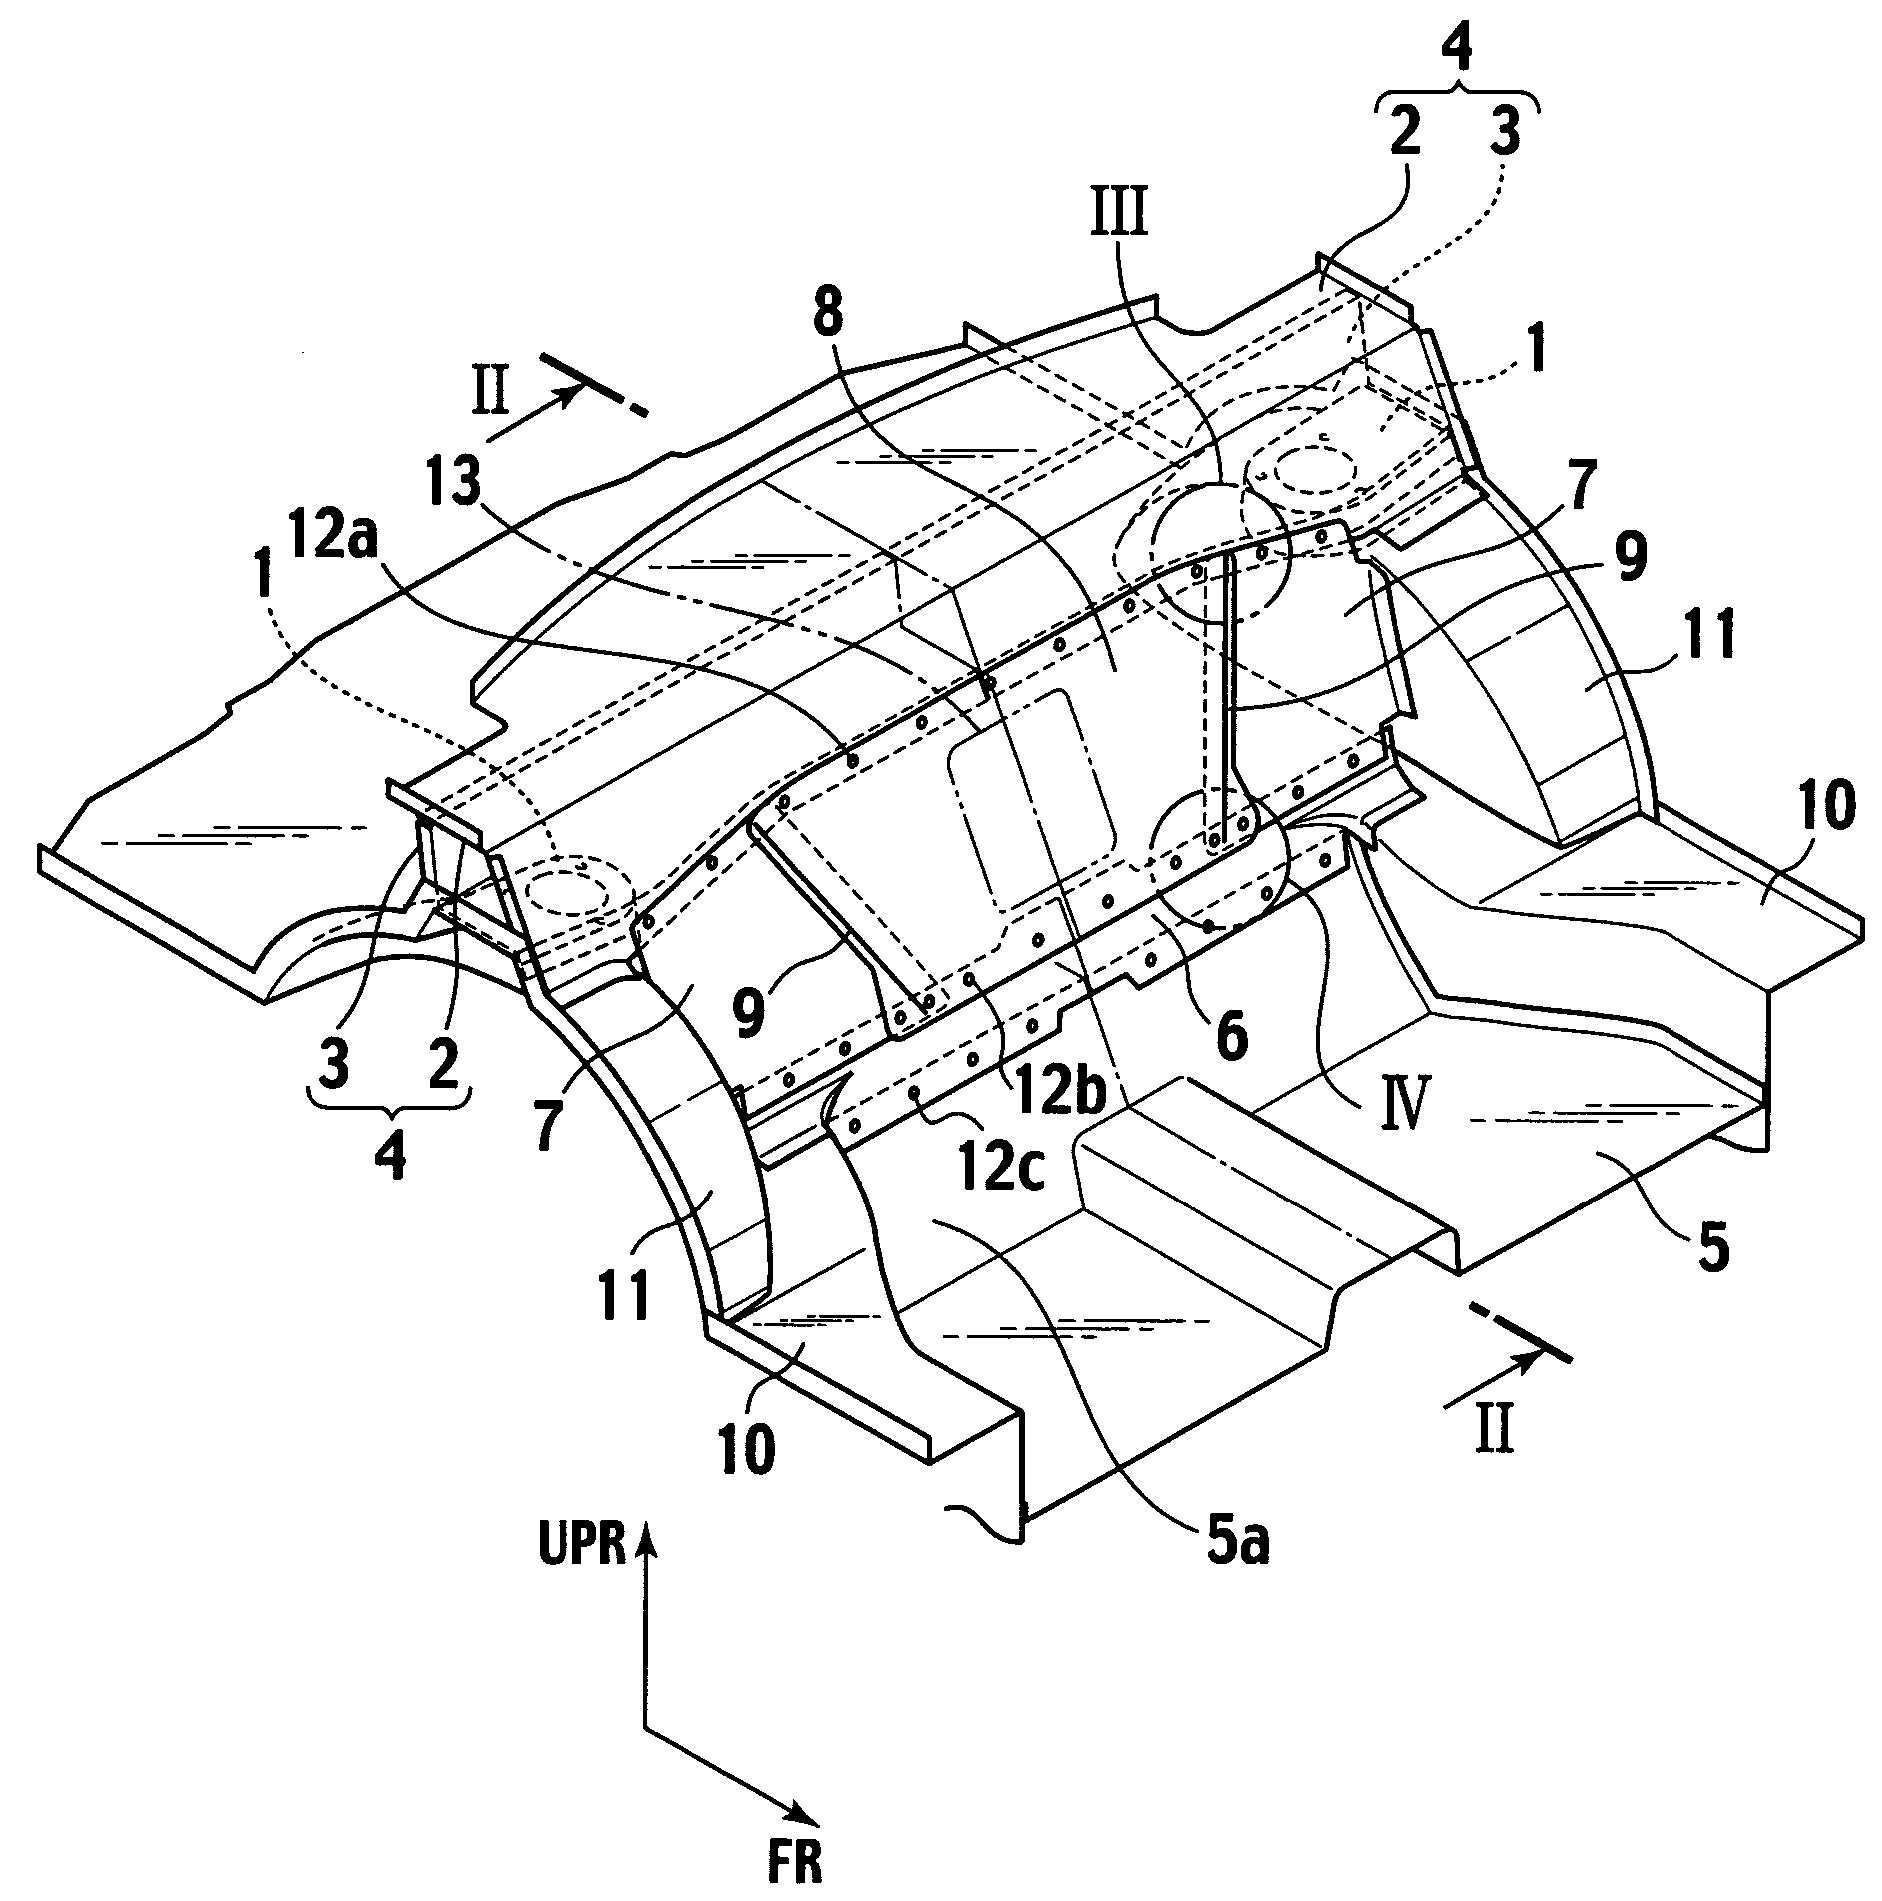 Vehicle rear body structure